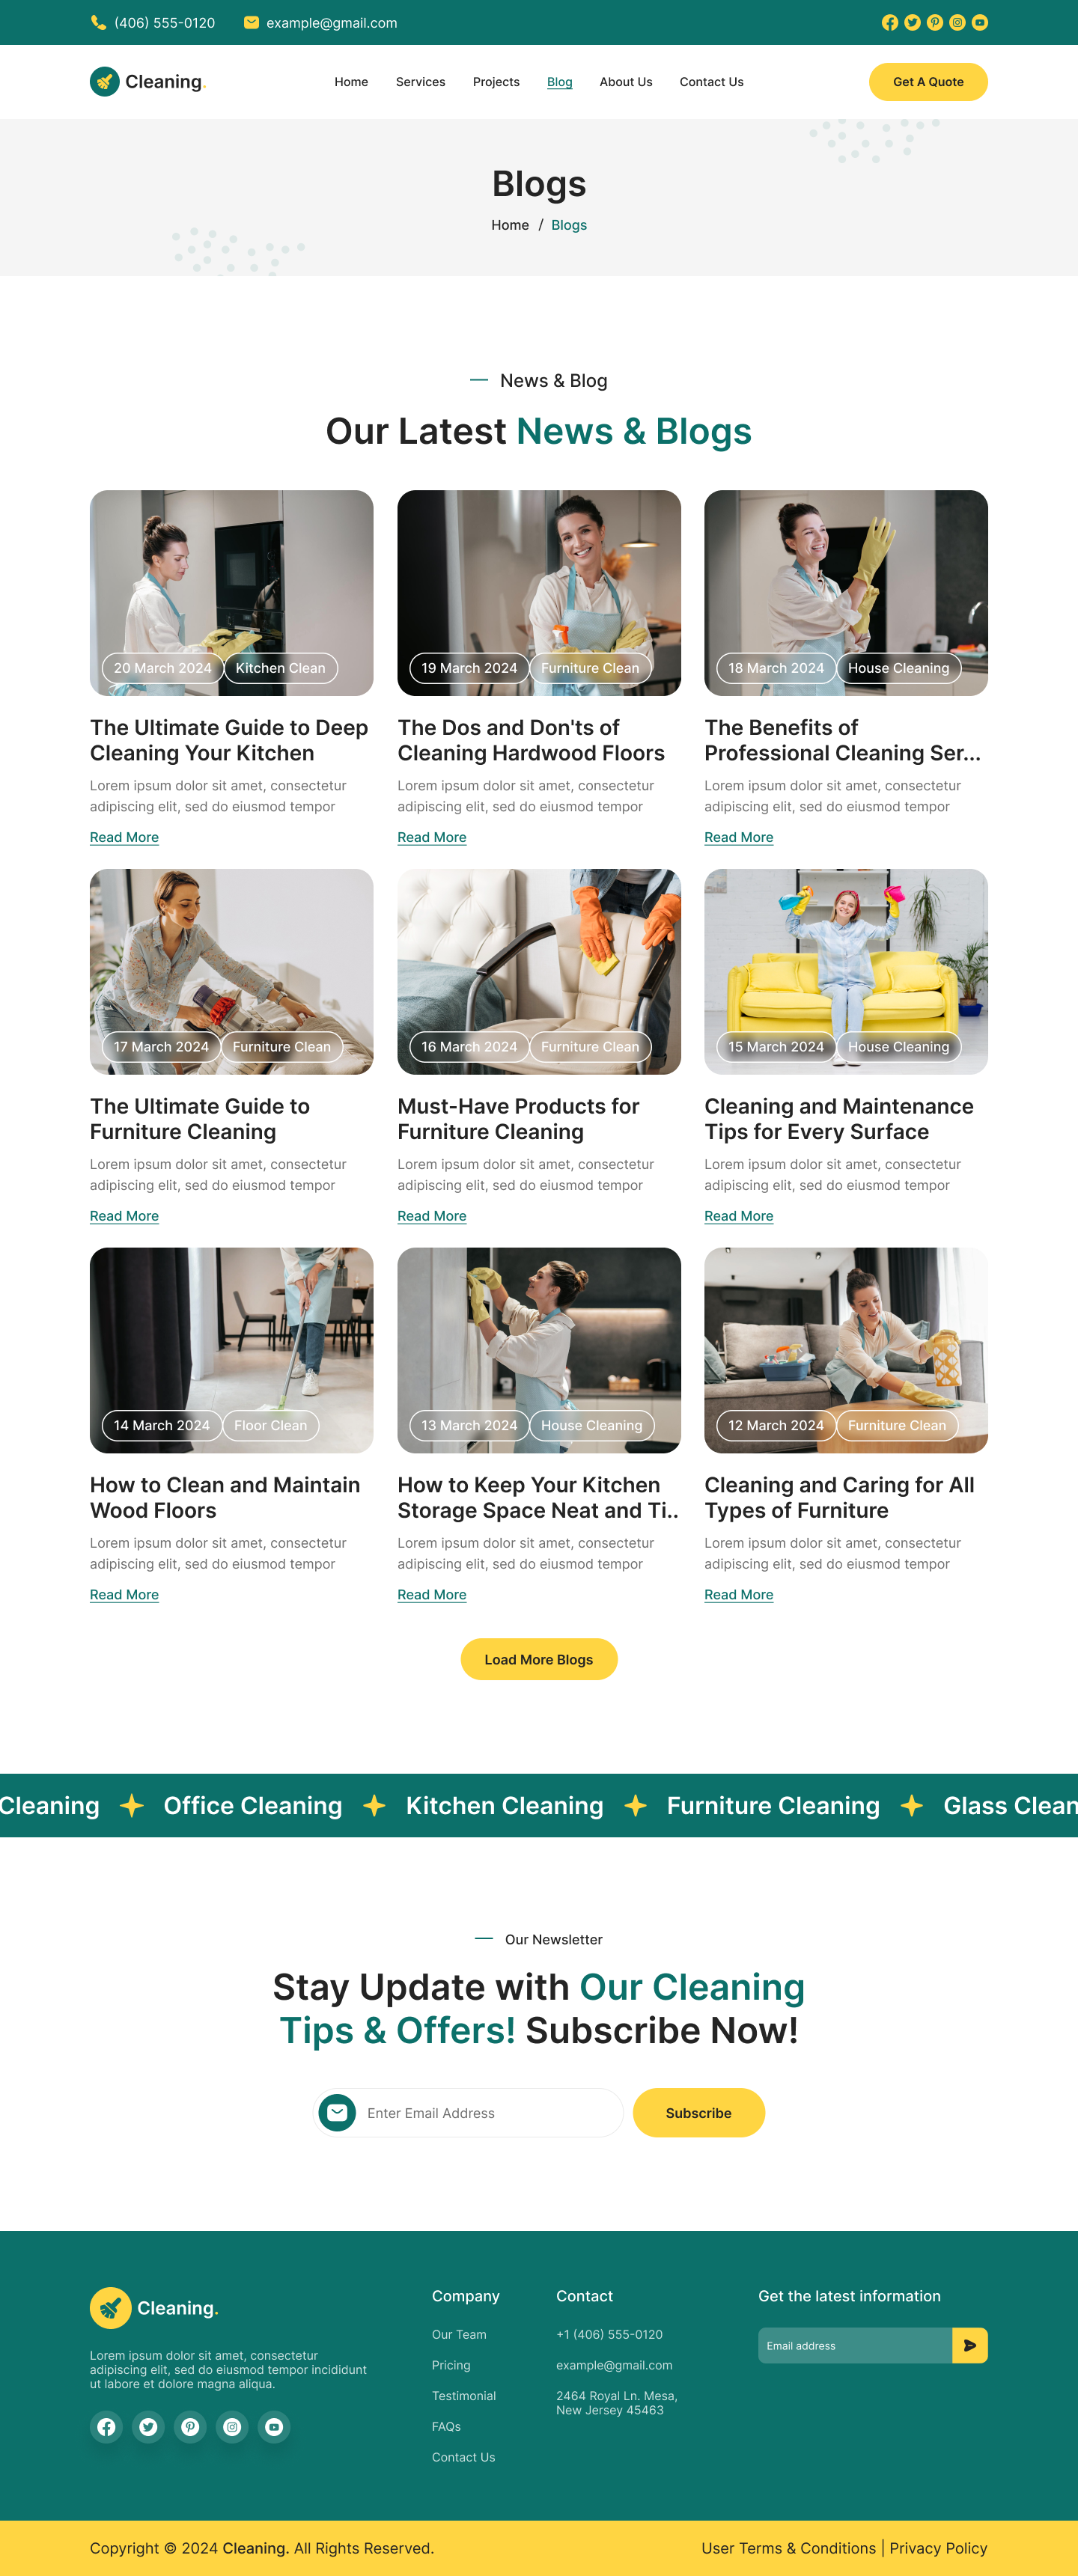 cleaning service website Blogs Page figma design